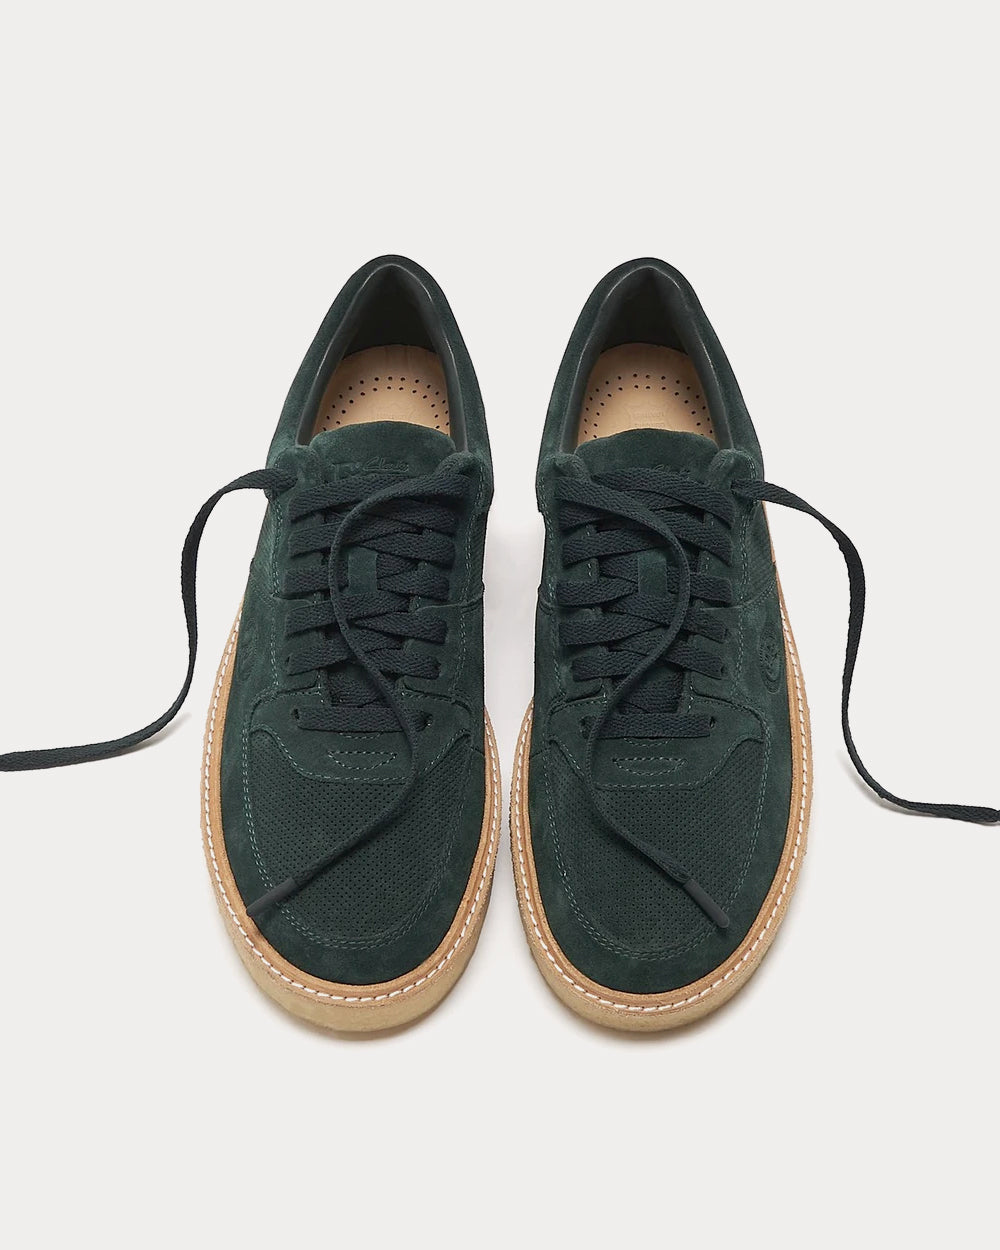 Clarks x Kith - Lockhill Suede Dark Teal Low Top Sneakers